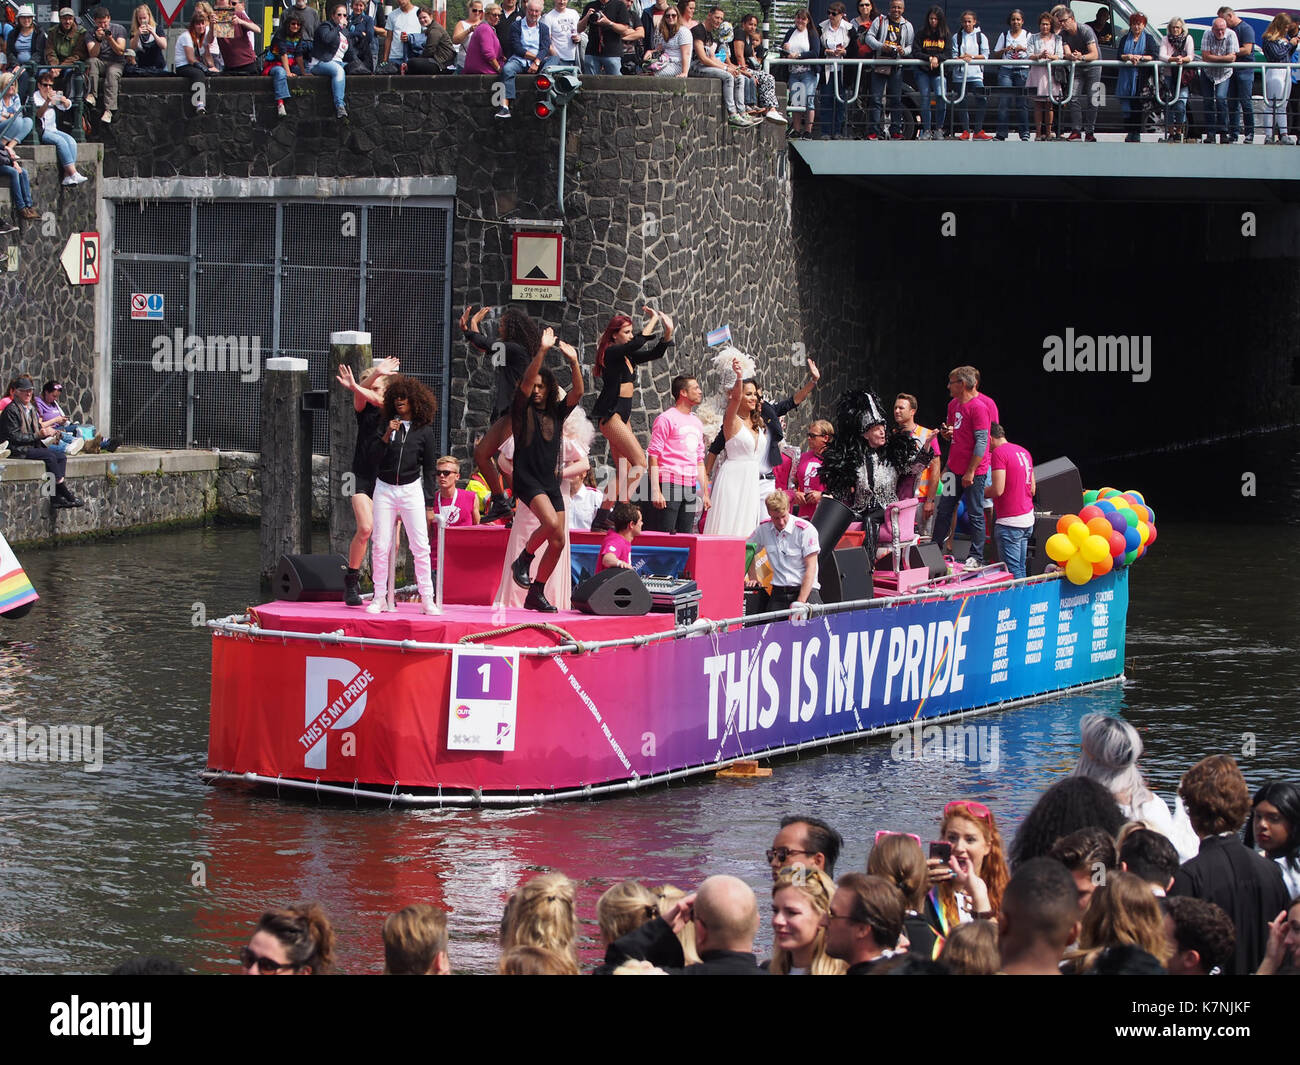 Boat 1 This is my pride, Canal Parade Amsterdam 2017 foto 3 Stock Photo